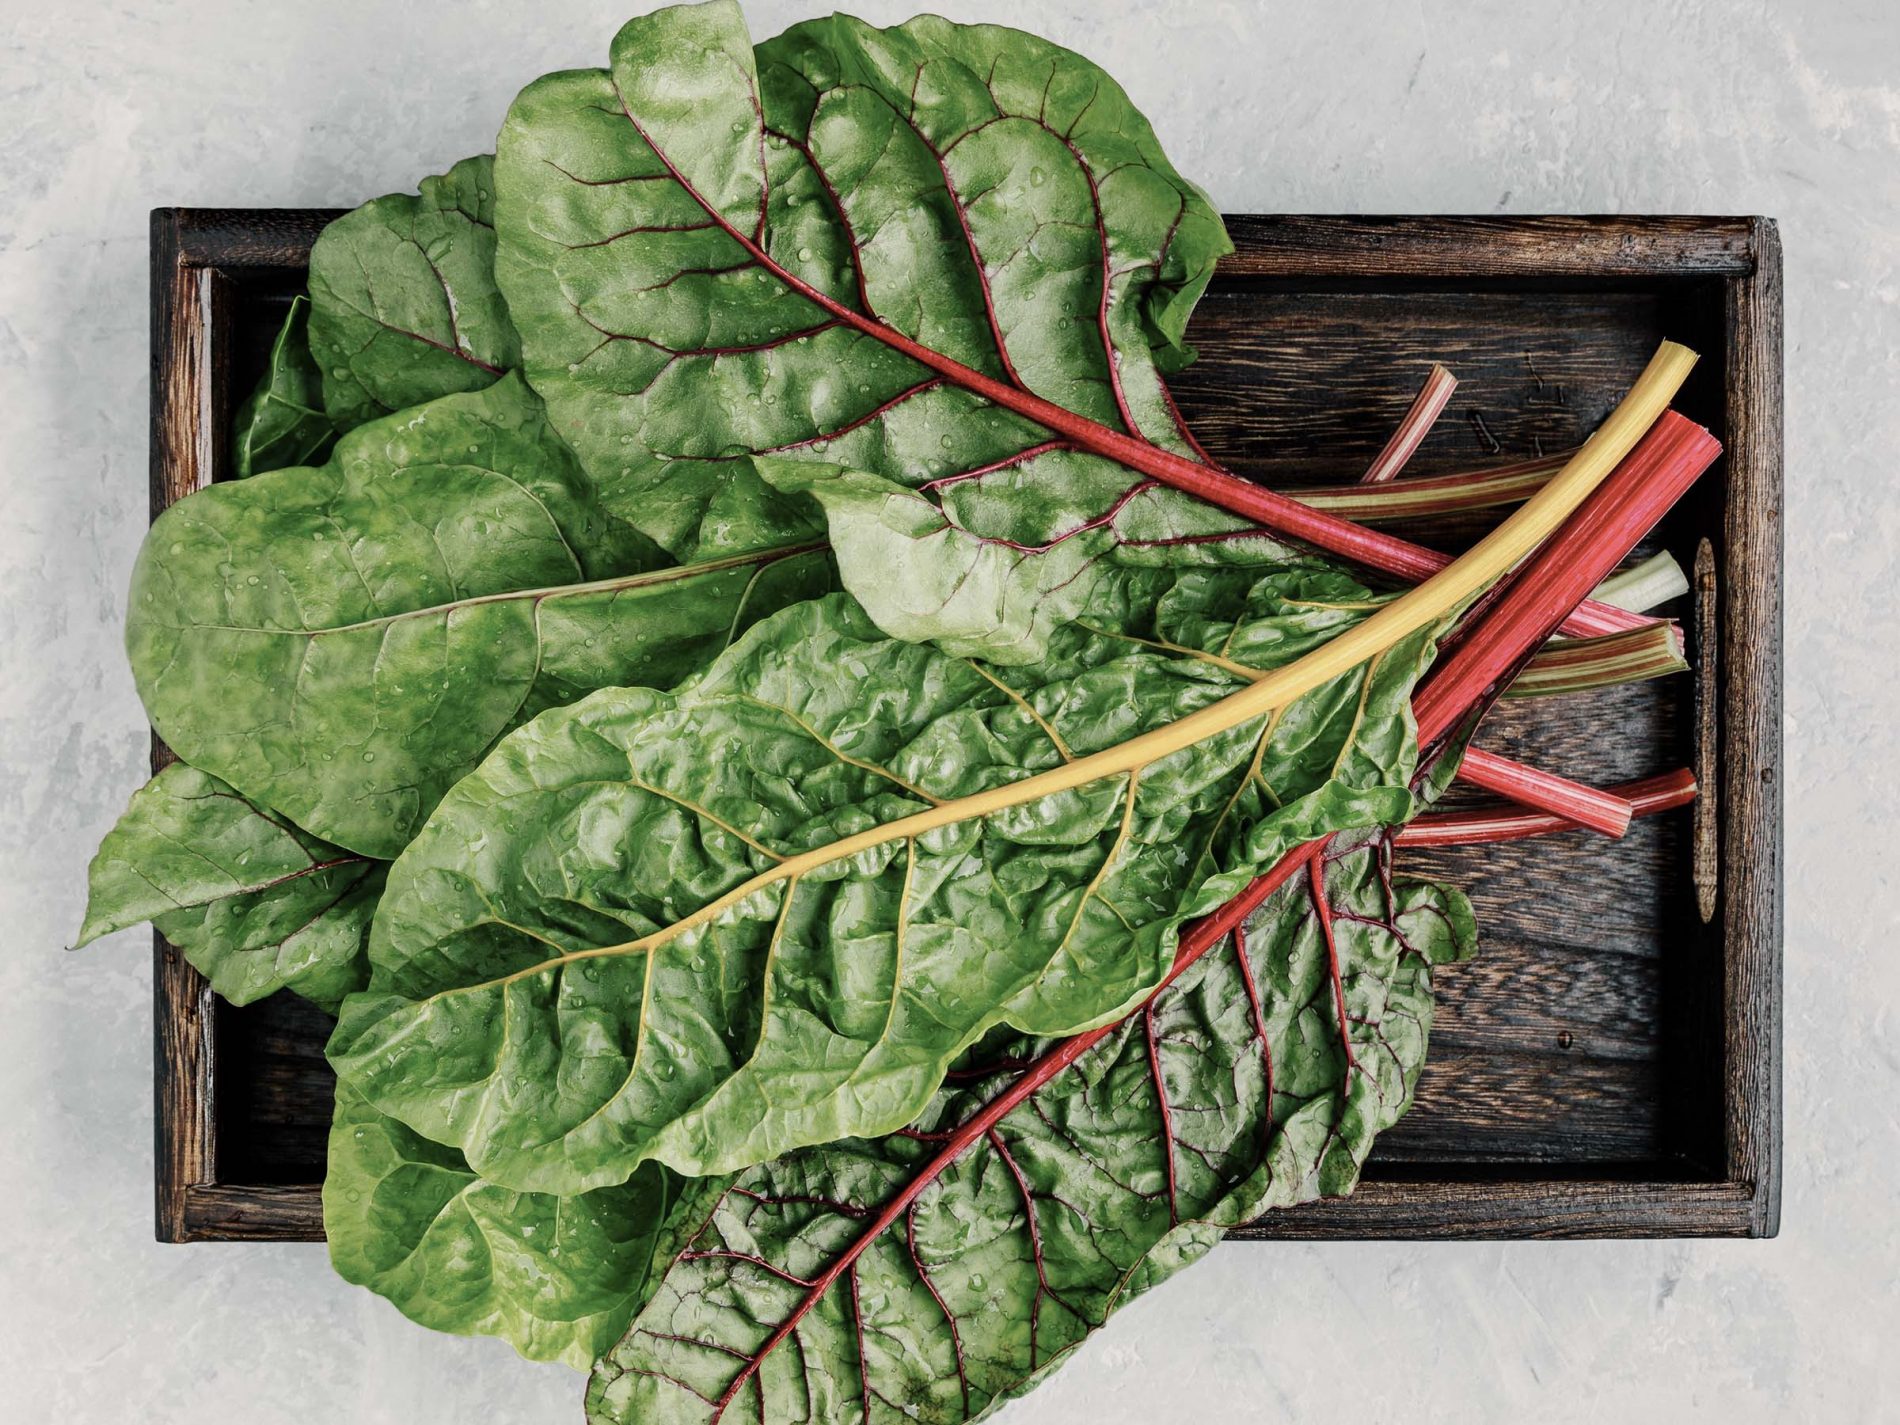 Swiss chard on a wooden tray